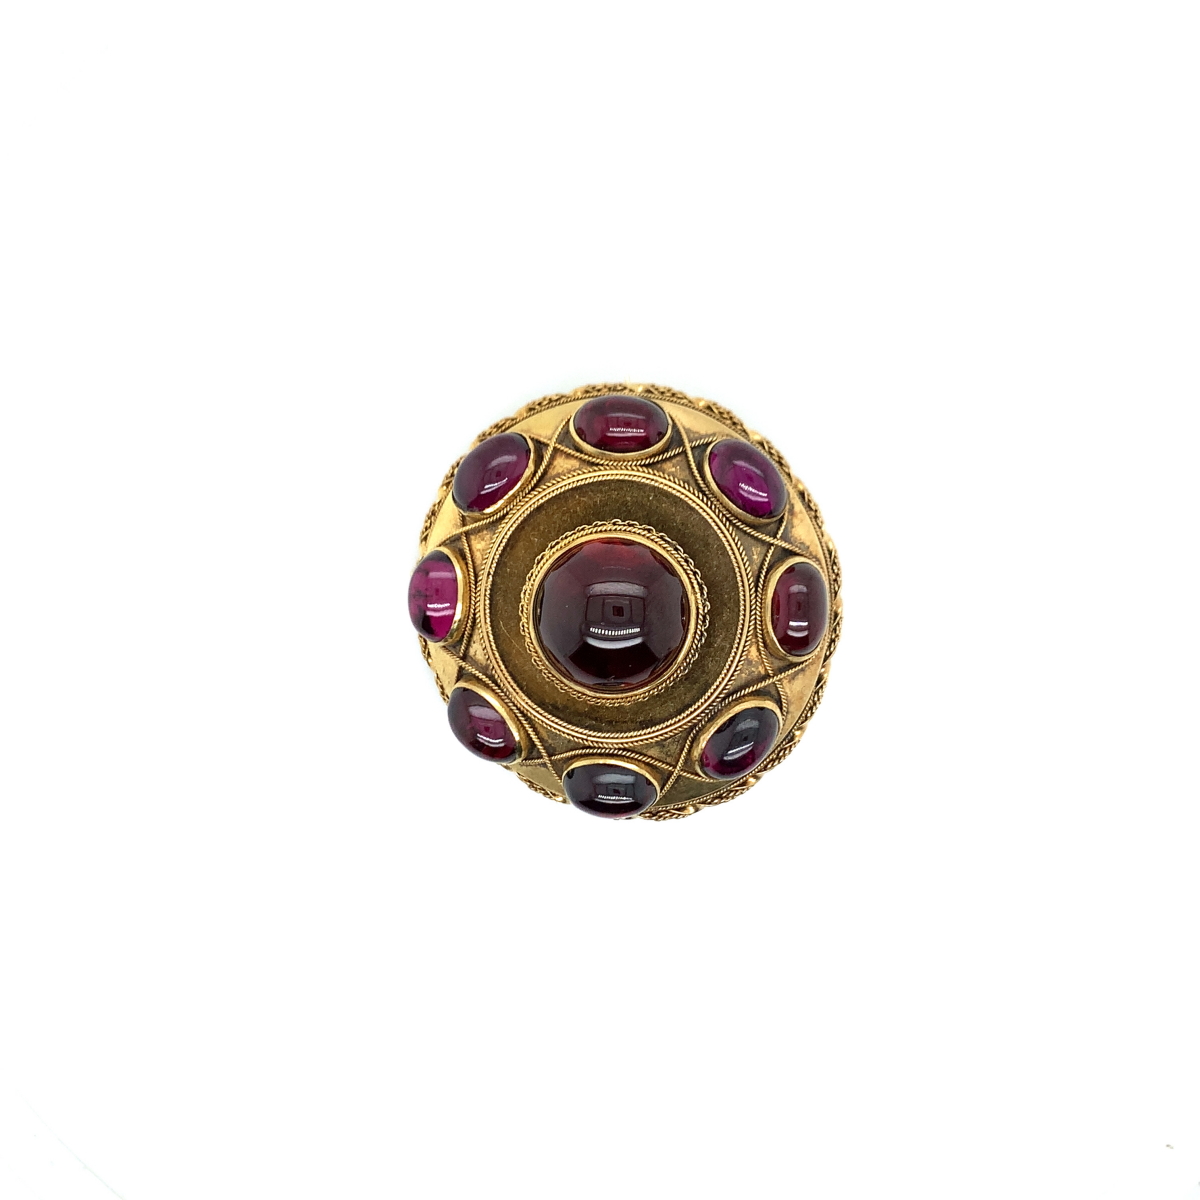 AN ANTIQUE CABOCHON SET ETRUSCAN STYLE GARNET BROOCH. THE EIGHT OUTER GARNETS WITH SNAKE LINK - Image 2 of 4